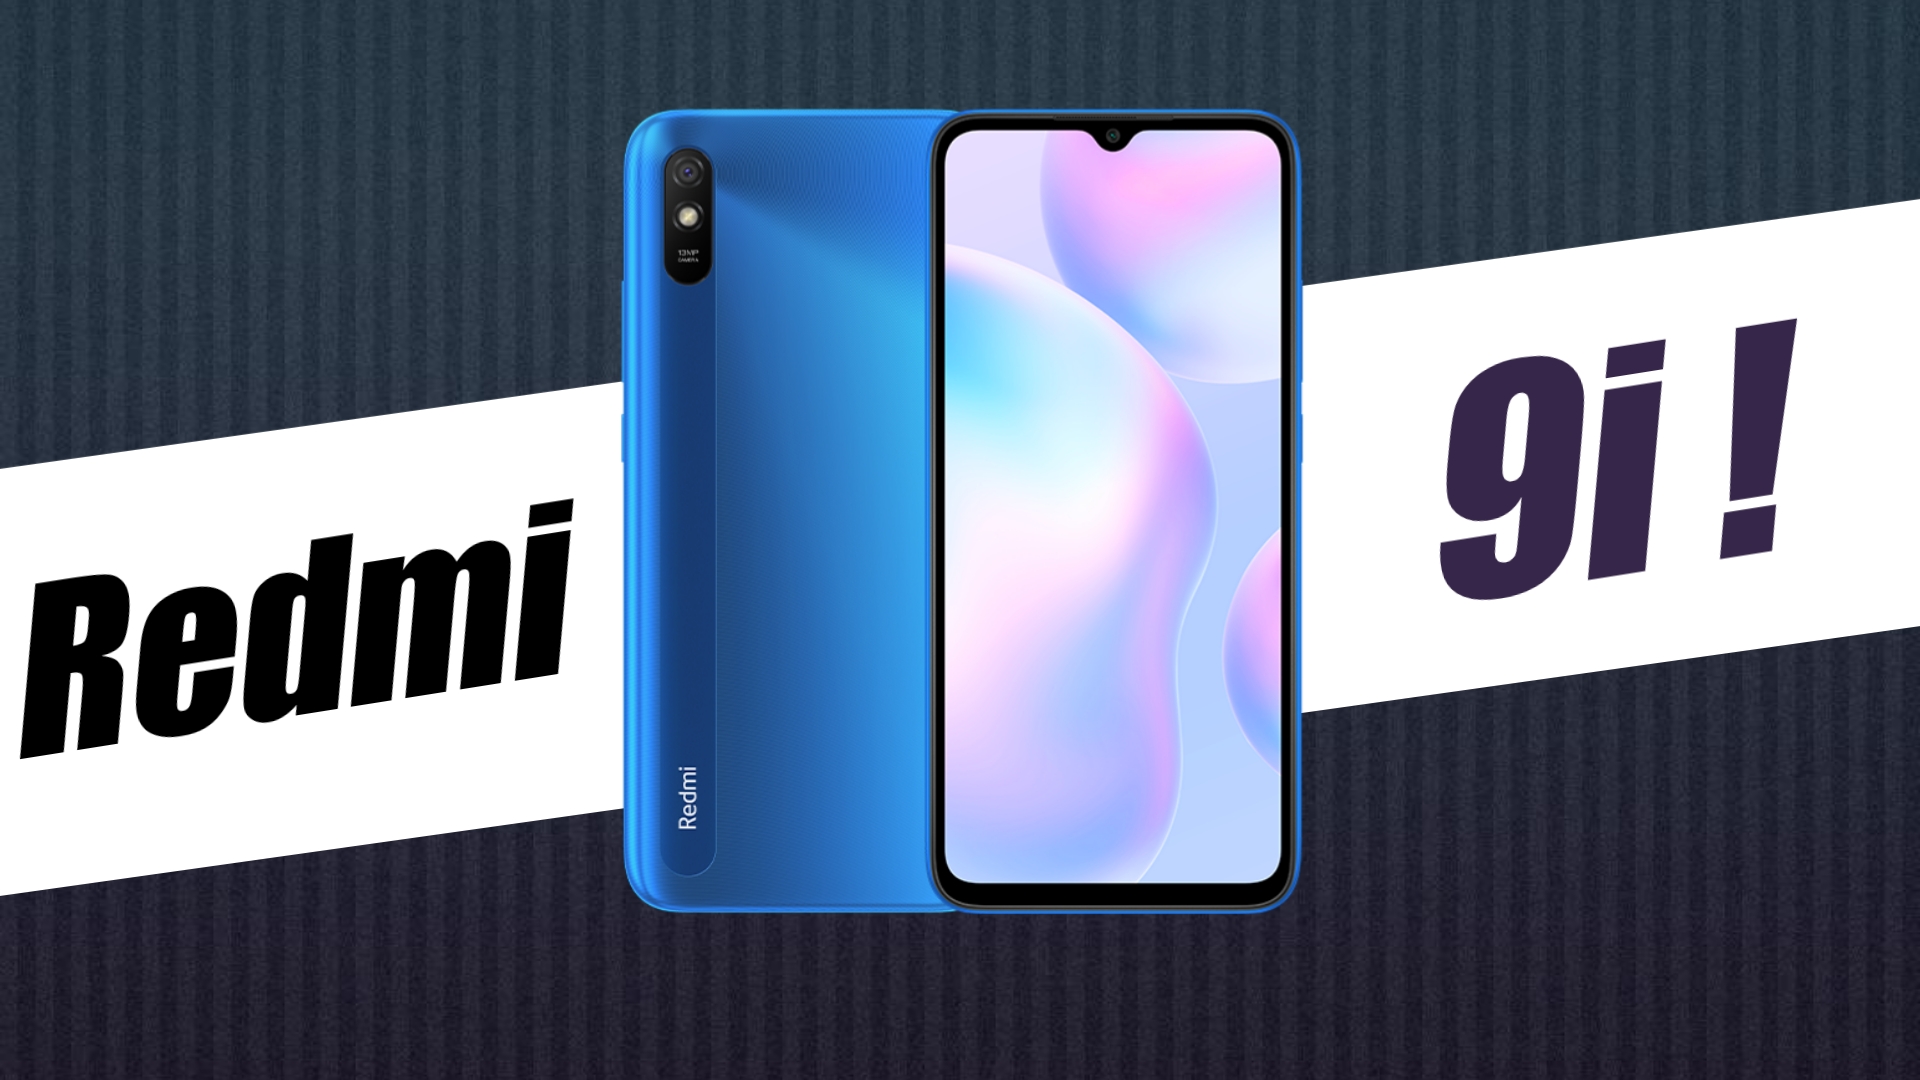 Redmi 9i Launched in India With MediaTek Helio G25 SoC: Specifications, Price